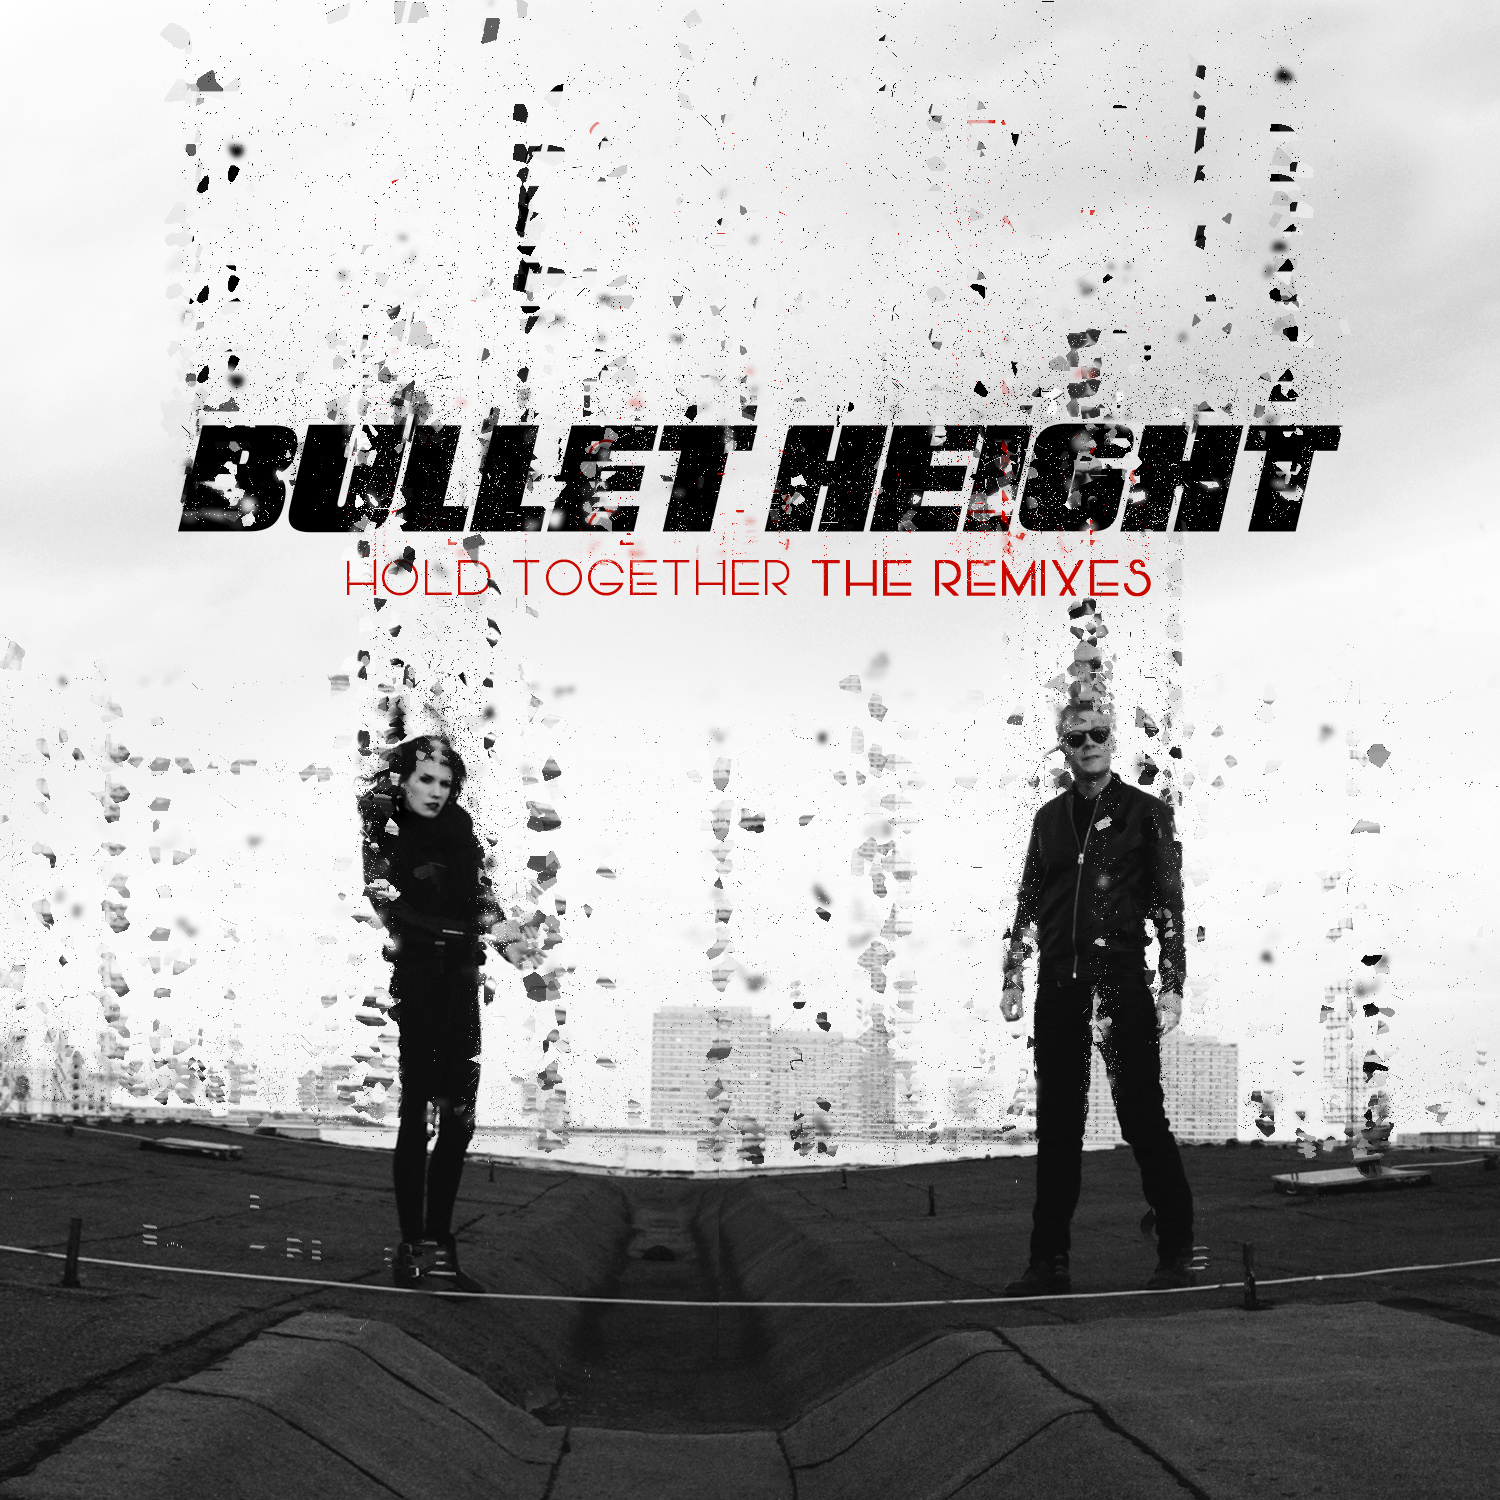 Height песни. Bullet height альбомы. Bullet height hold together - the Remixes. No Bang hold on обложка.